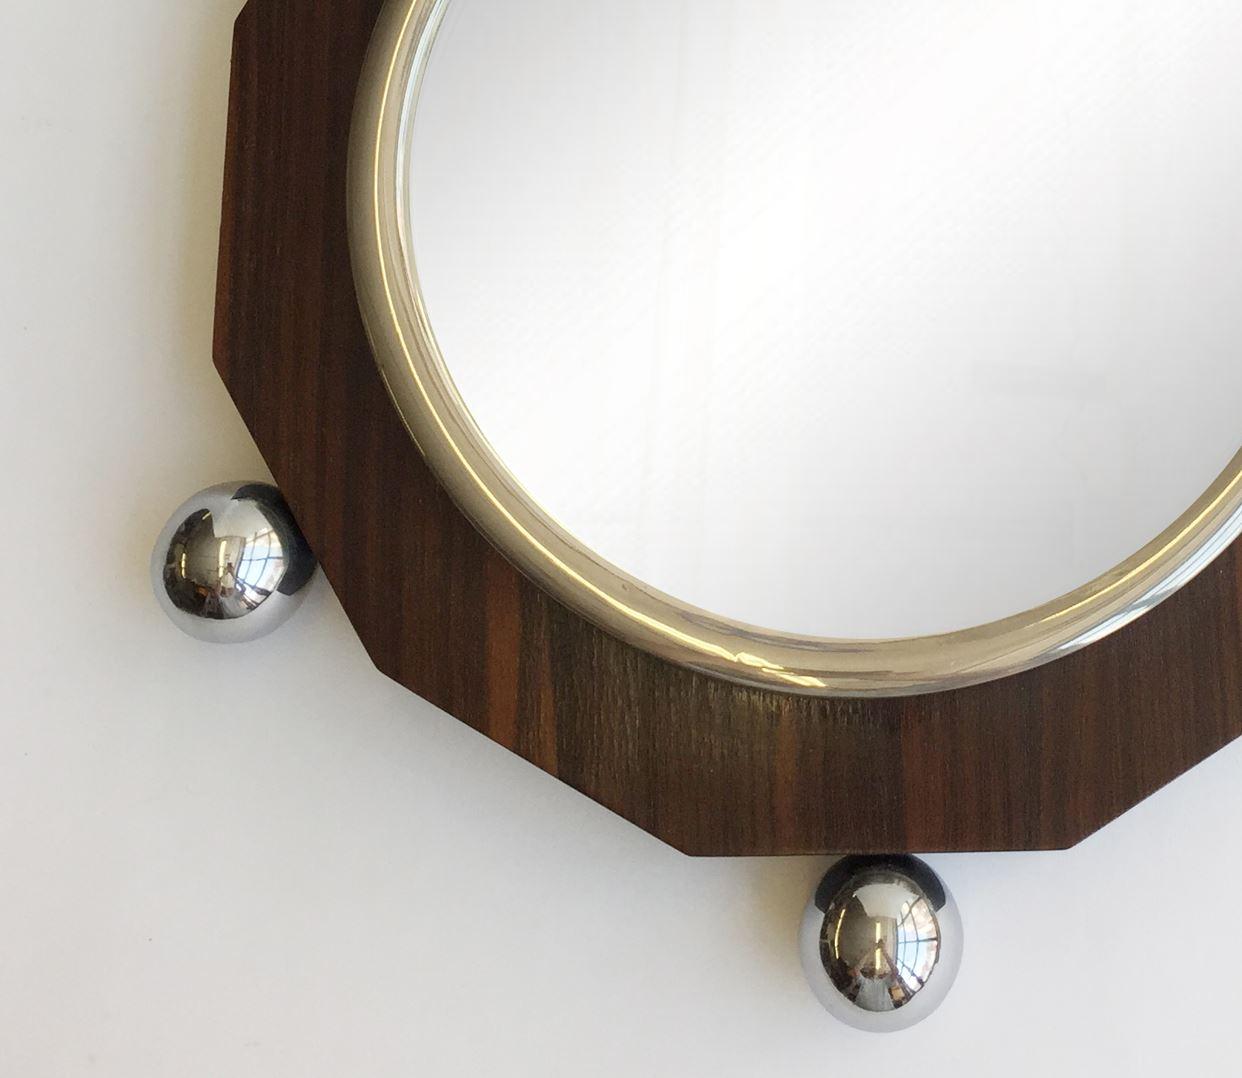 Wooden hexagonal nautical mirror made from acacia wood and 6 nickel platted spheres. 

Property from esteemed interior designer Juan Montoya. Juan Montoya is one of the most acclaimed and prolific interior designers in the world today. Juan